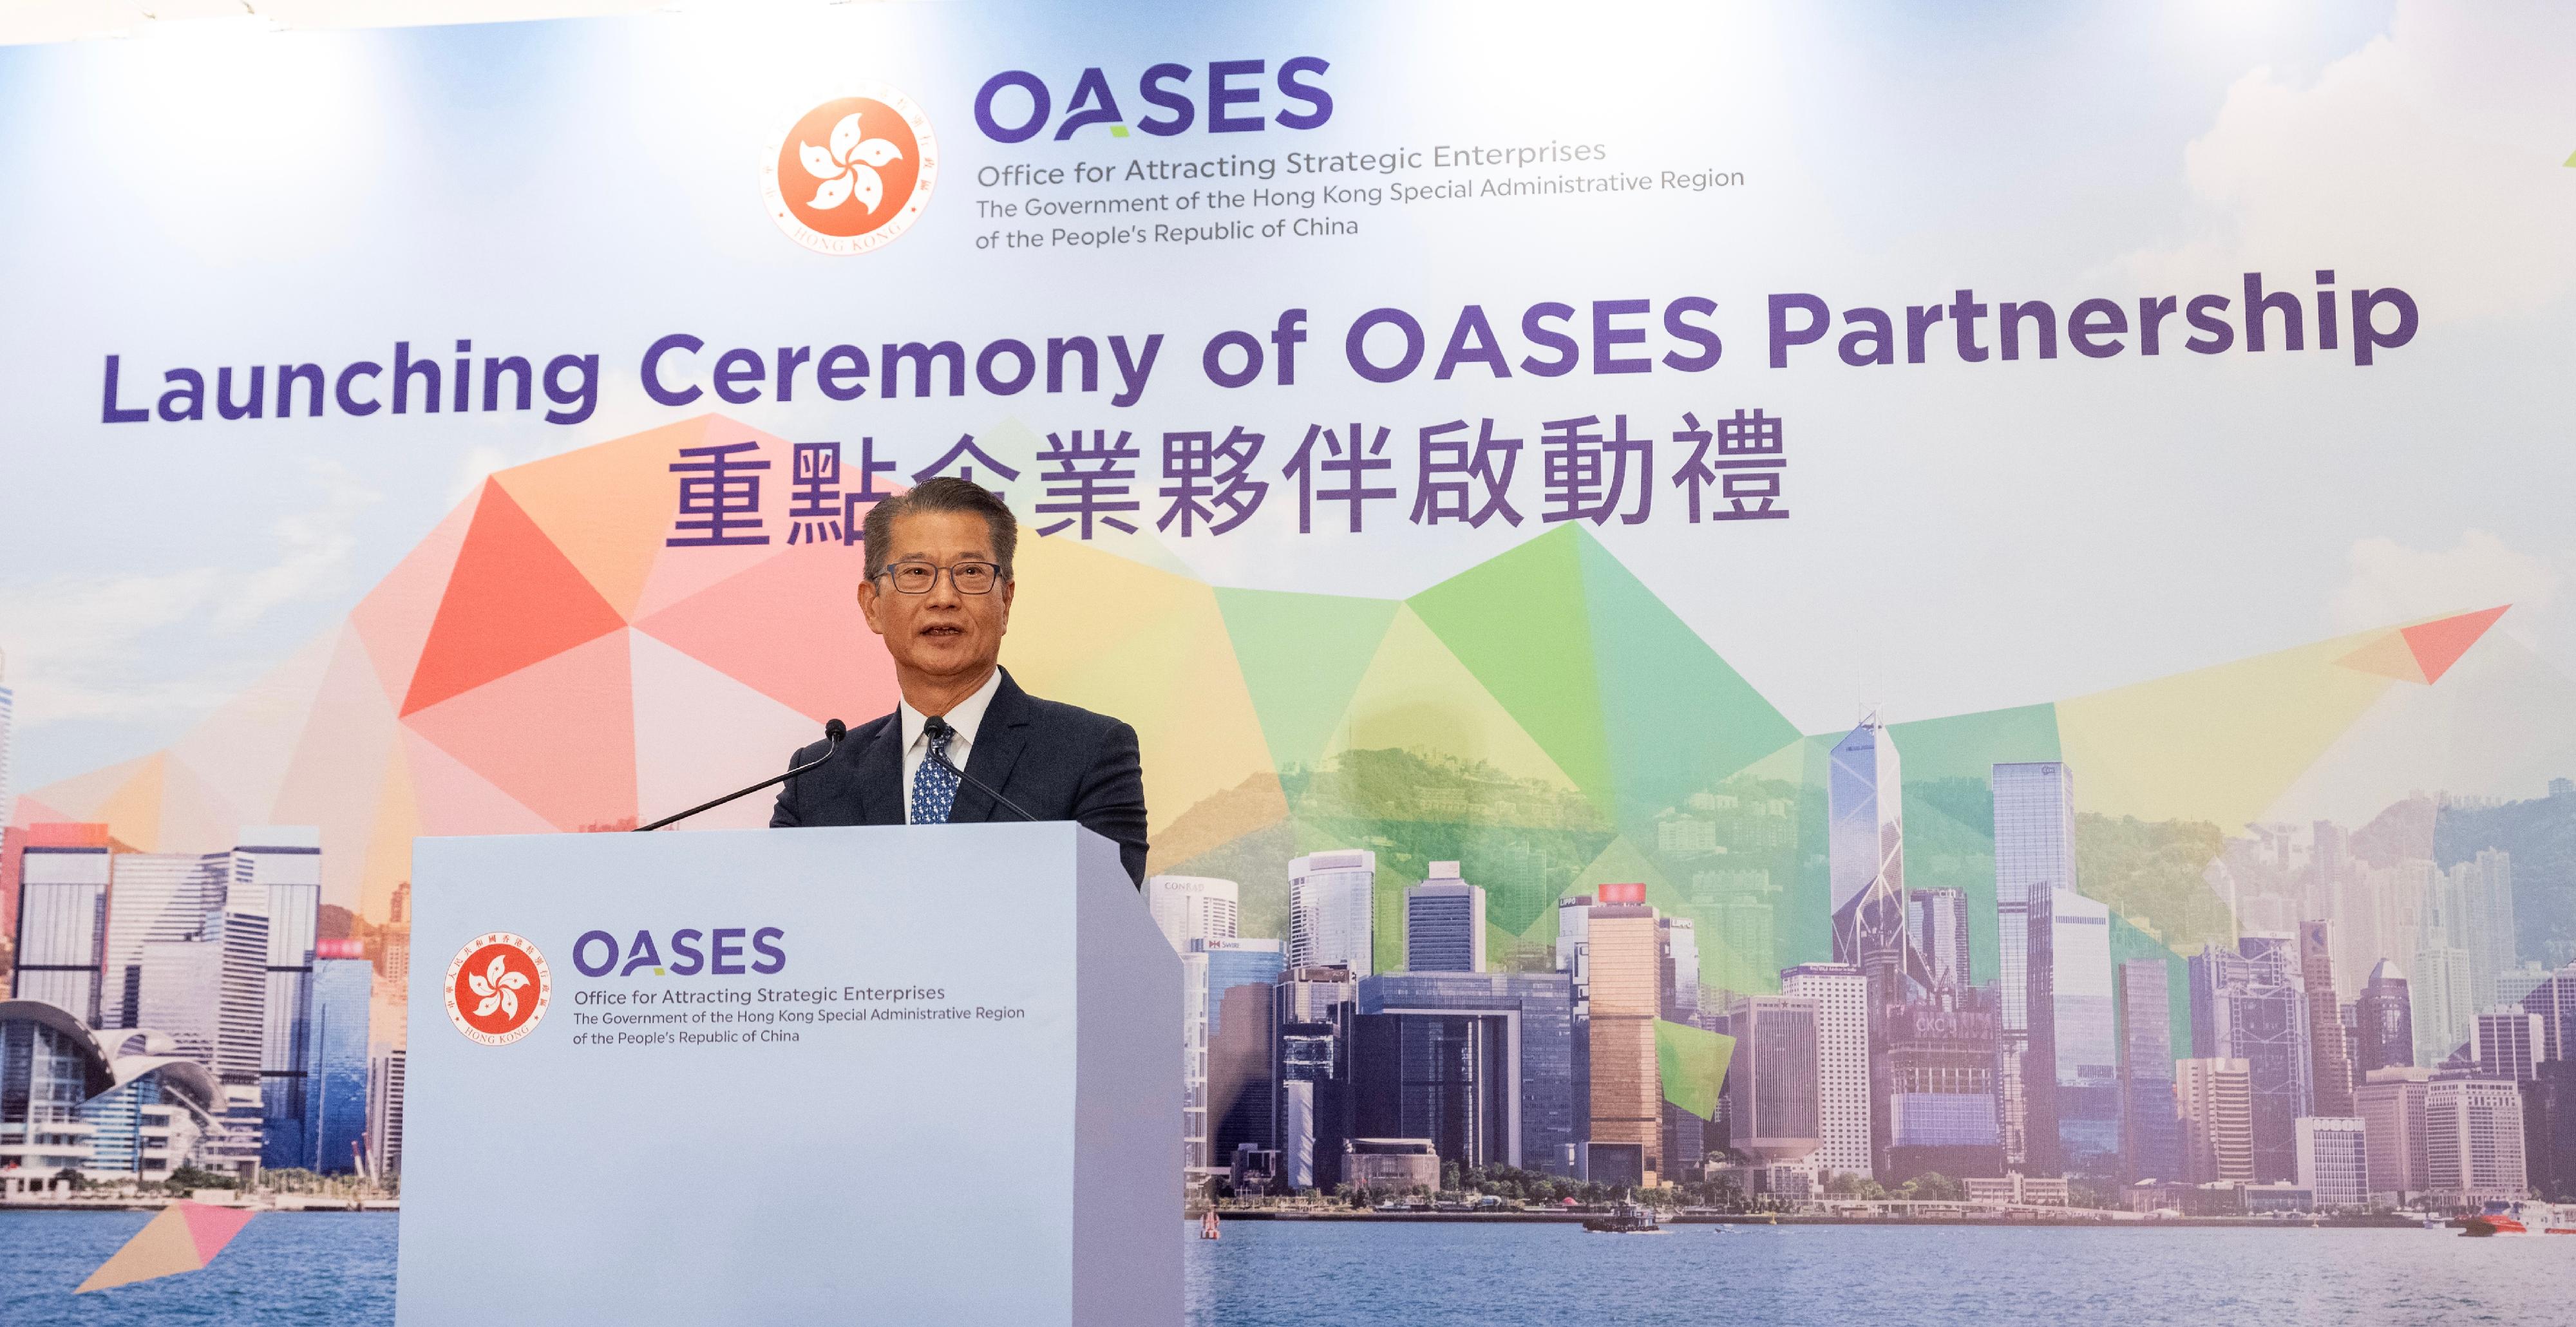 The Financial Secretary, Mr Paul Chan, speaks at the Launching Ceremony of OASES Partnership held by the Office for Attracting Strategic Enterprises today (October 4).